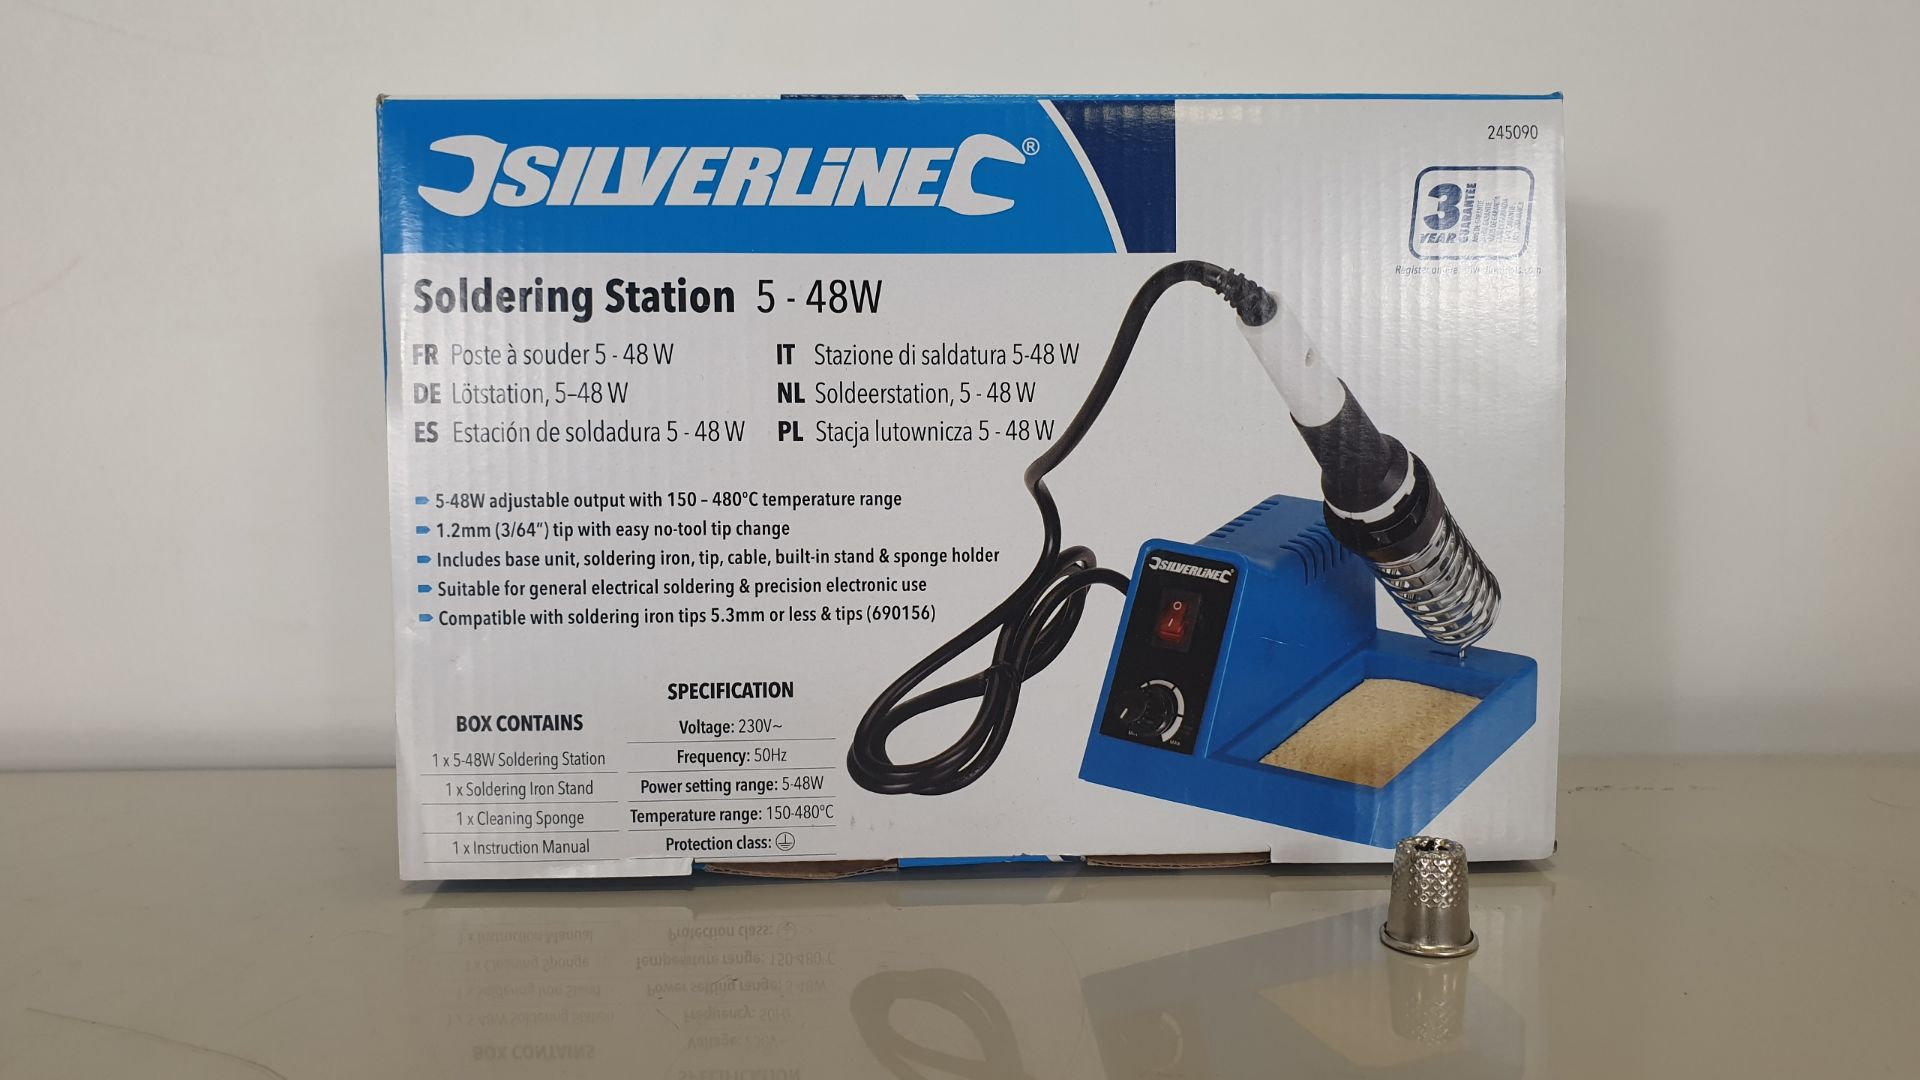 10 X BRAND NEW SILVERLINE SOLDERING STATIONS 5-48W (PROD CODE 245090) - RRP £31.34 EACH (EXC VAT) IN